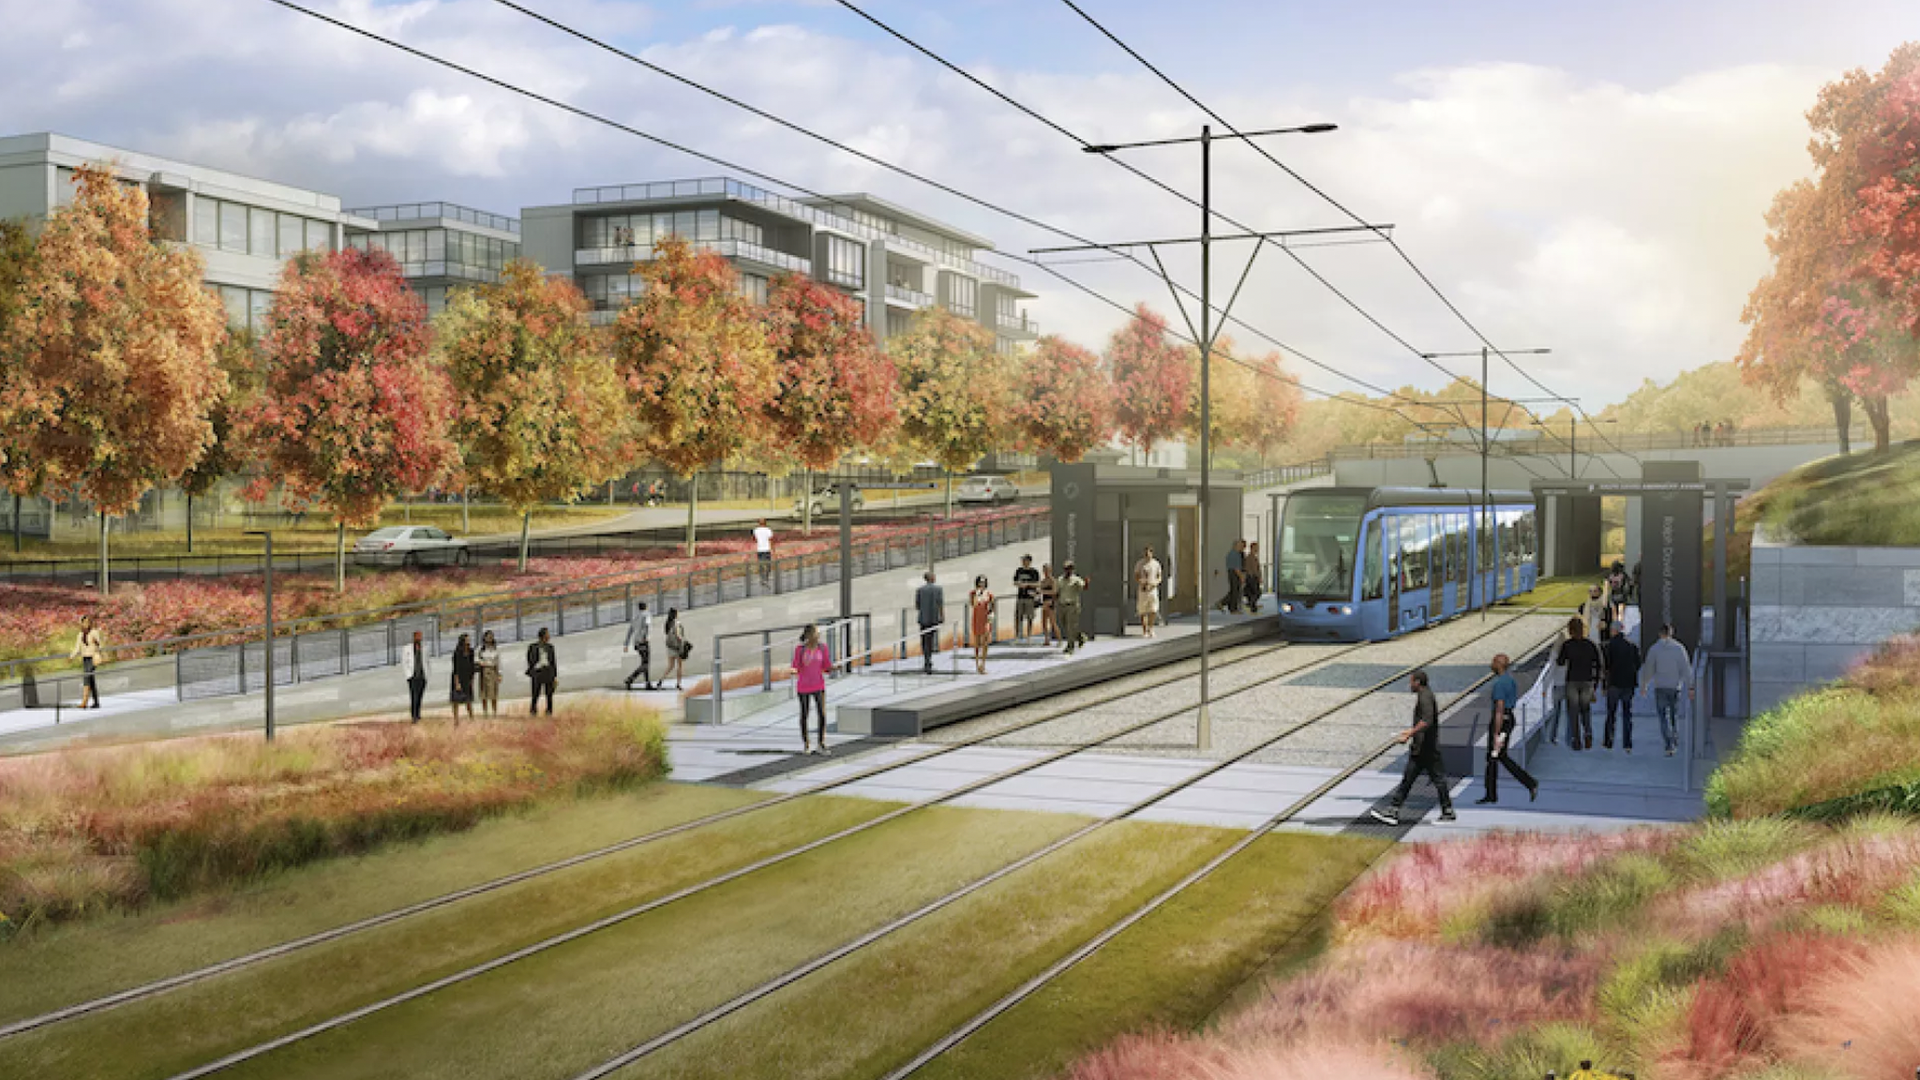 A rendering of people using light rail at a station near mixed-use development along the Atlanta Beltline